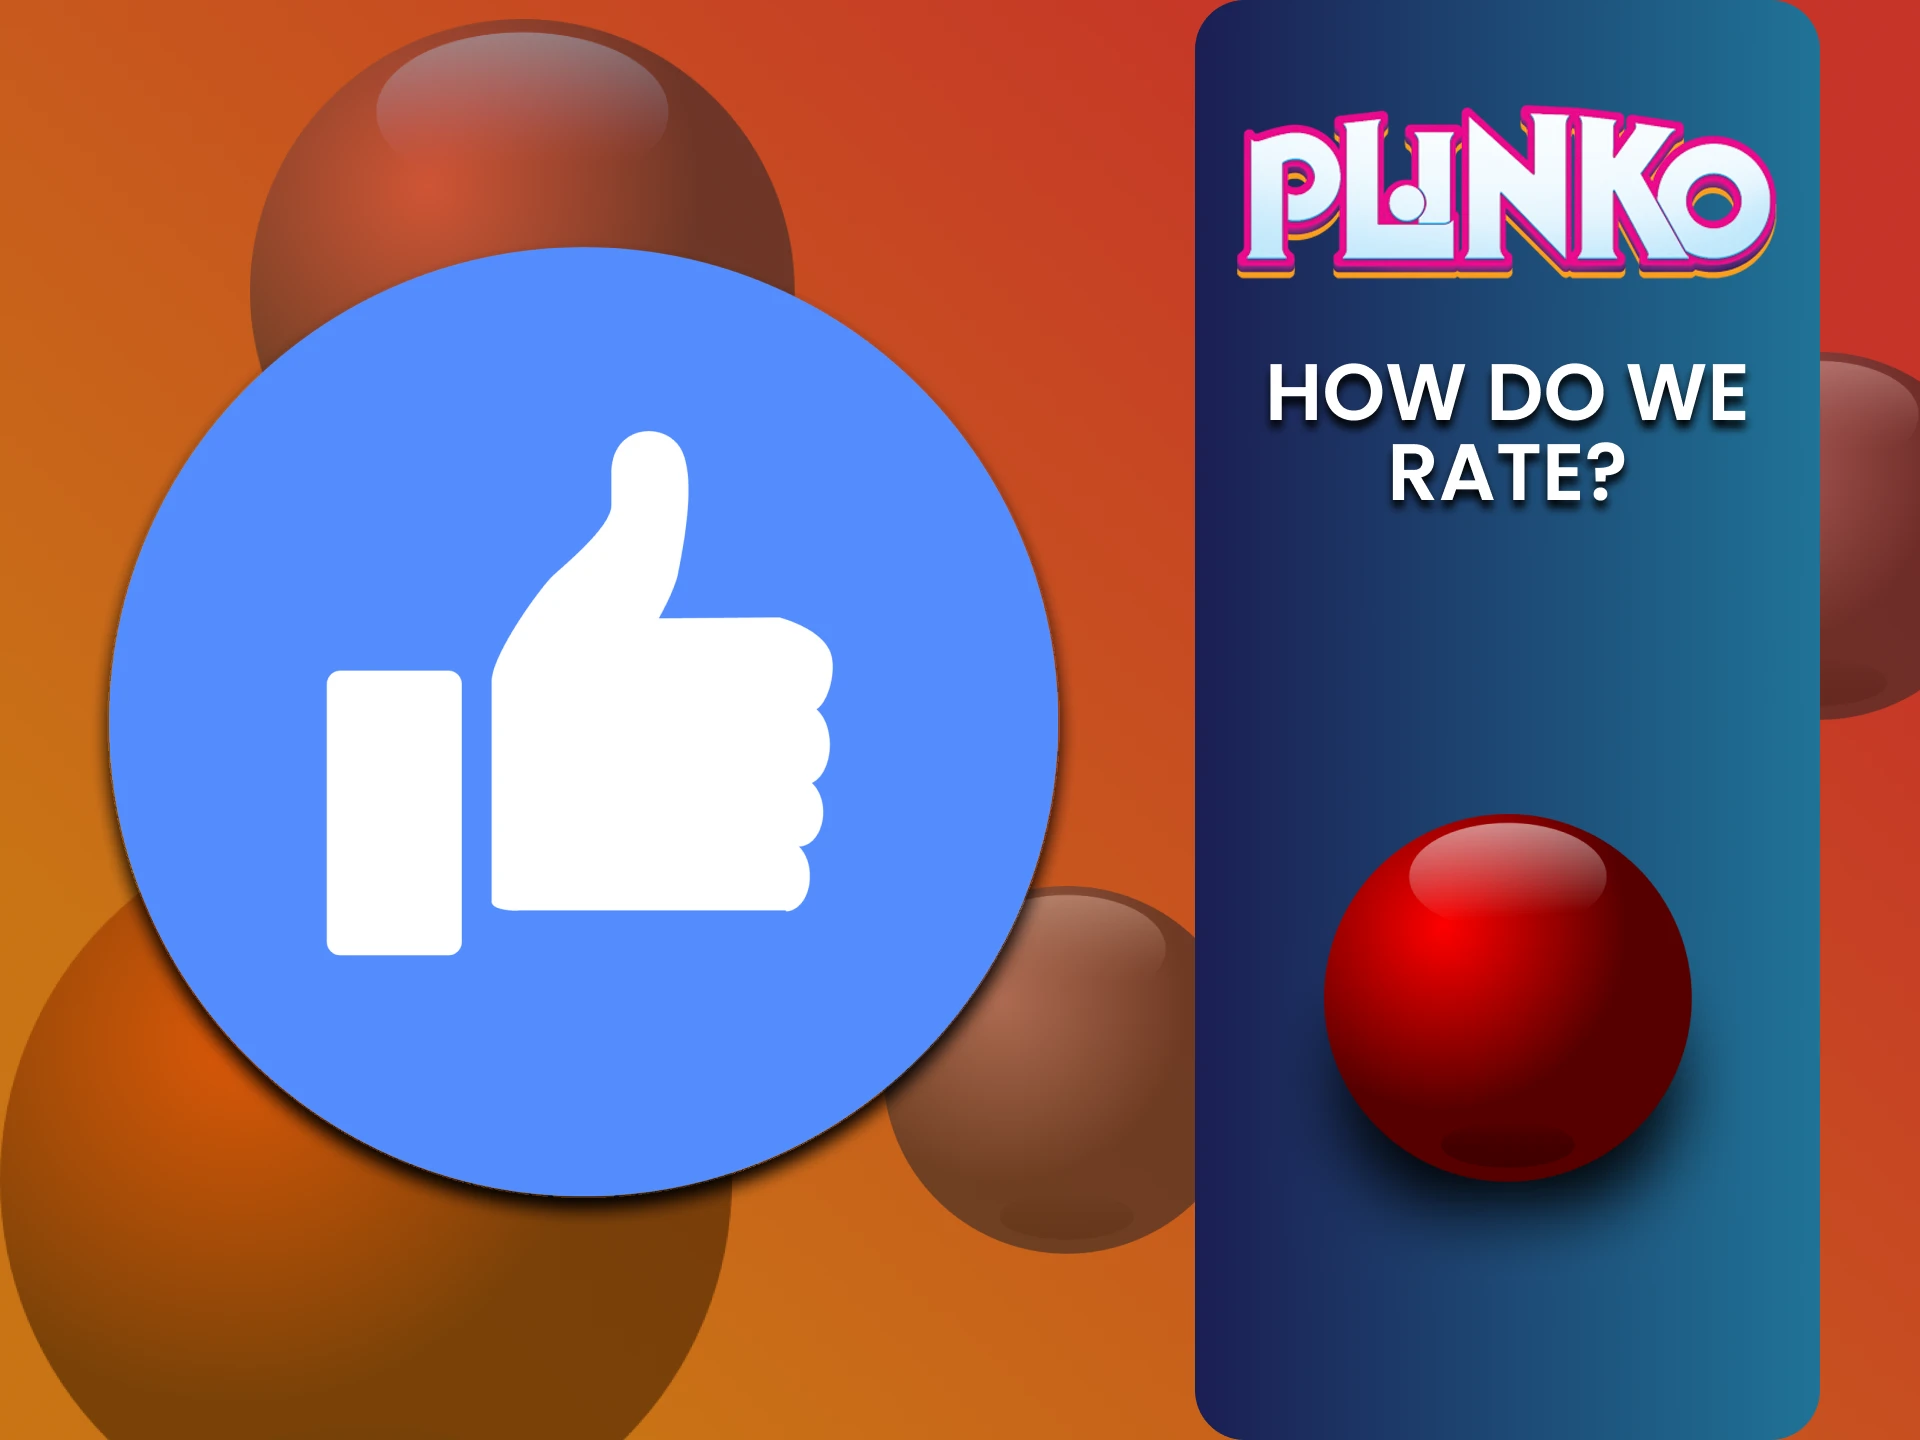 We will tell you how to choose the best application for playing Plinko.